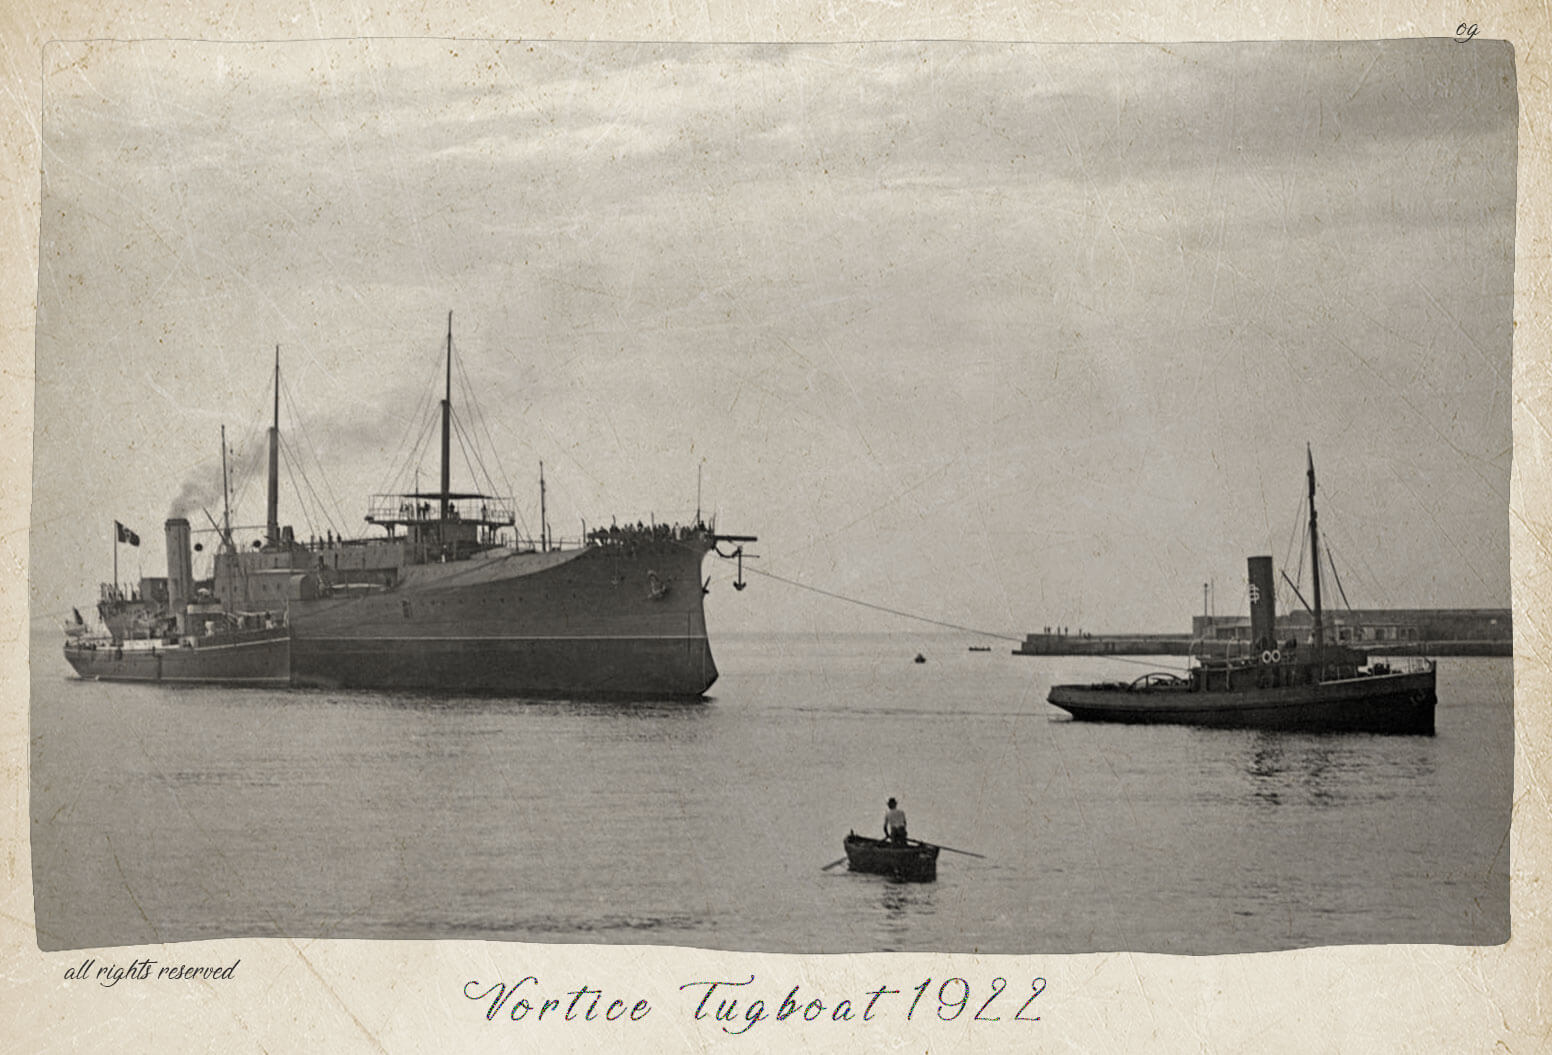 The tugboat Liguria tows the battleship Napoli, launched in 1905 in Castellammare di Stabia, to the Ansaldo outfitting workshop in the port of Genoa.